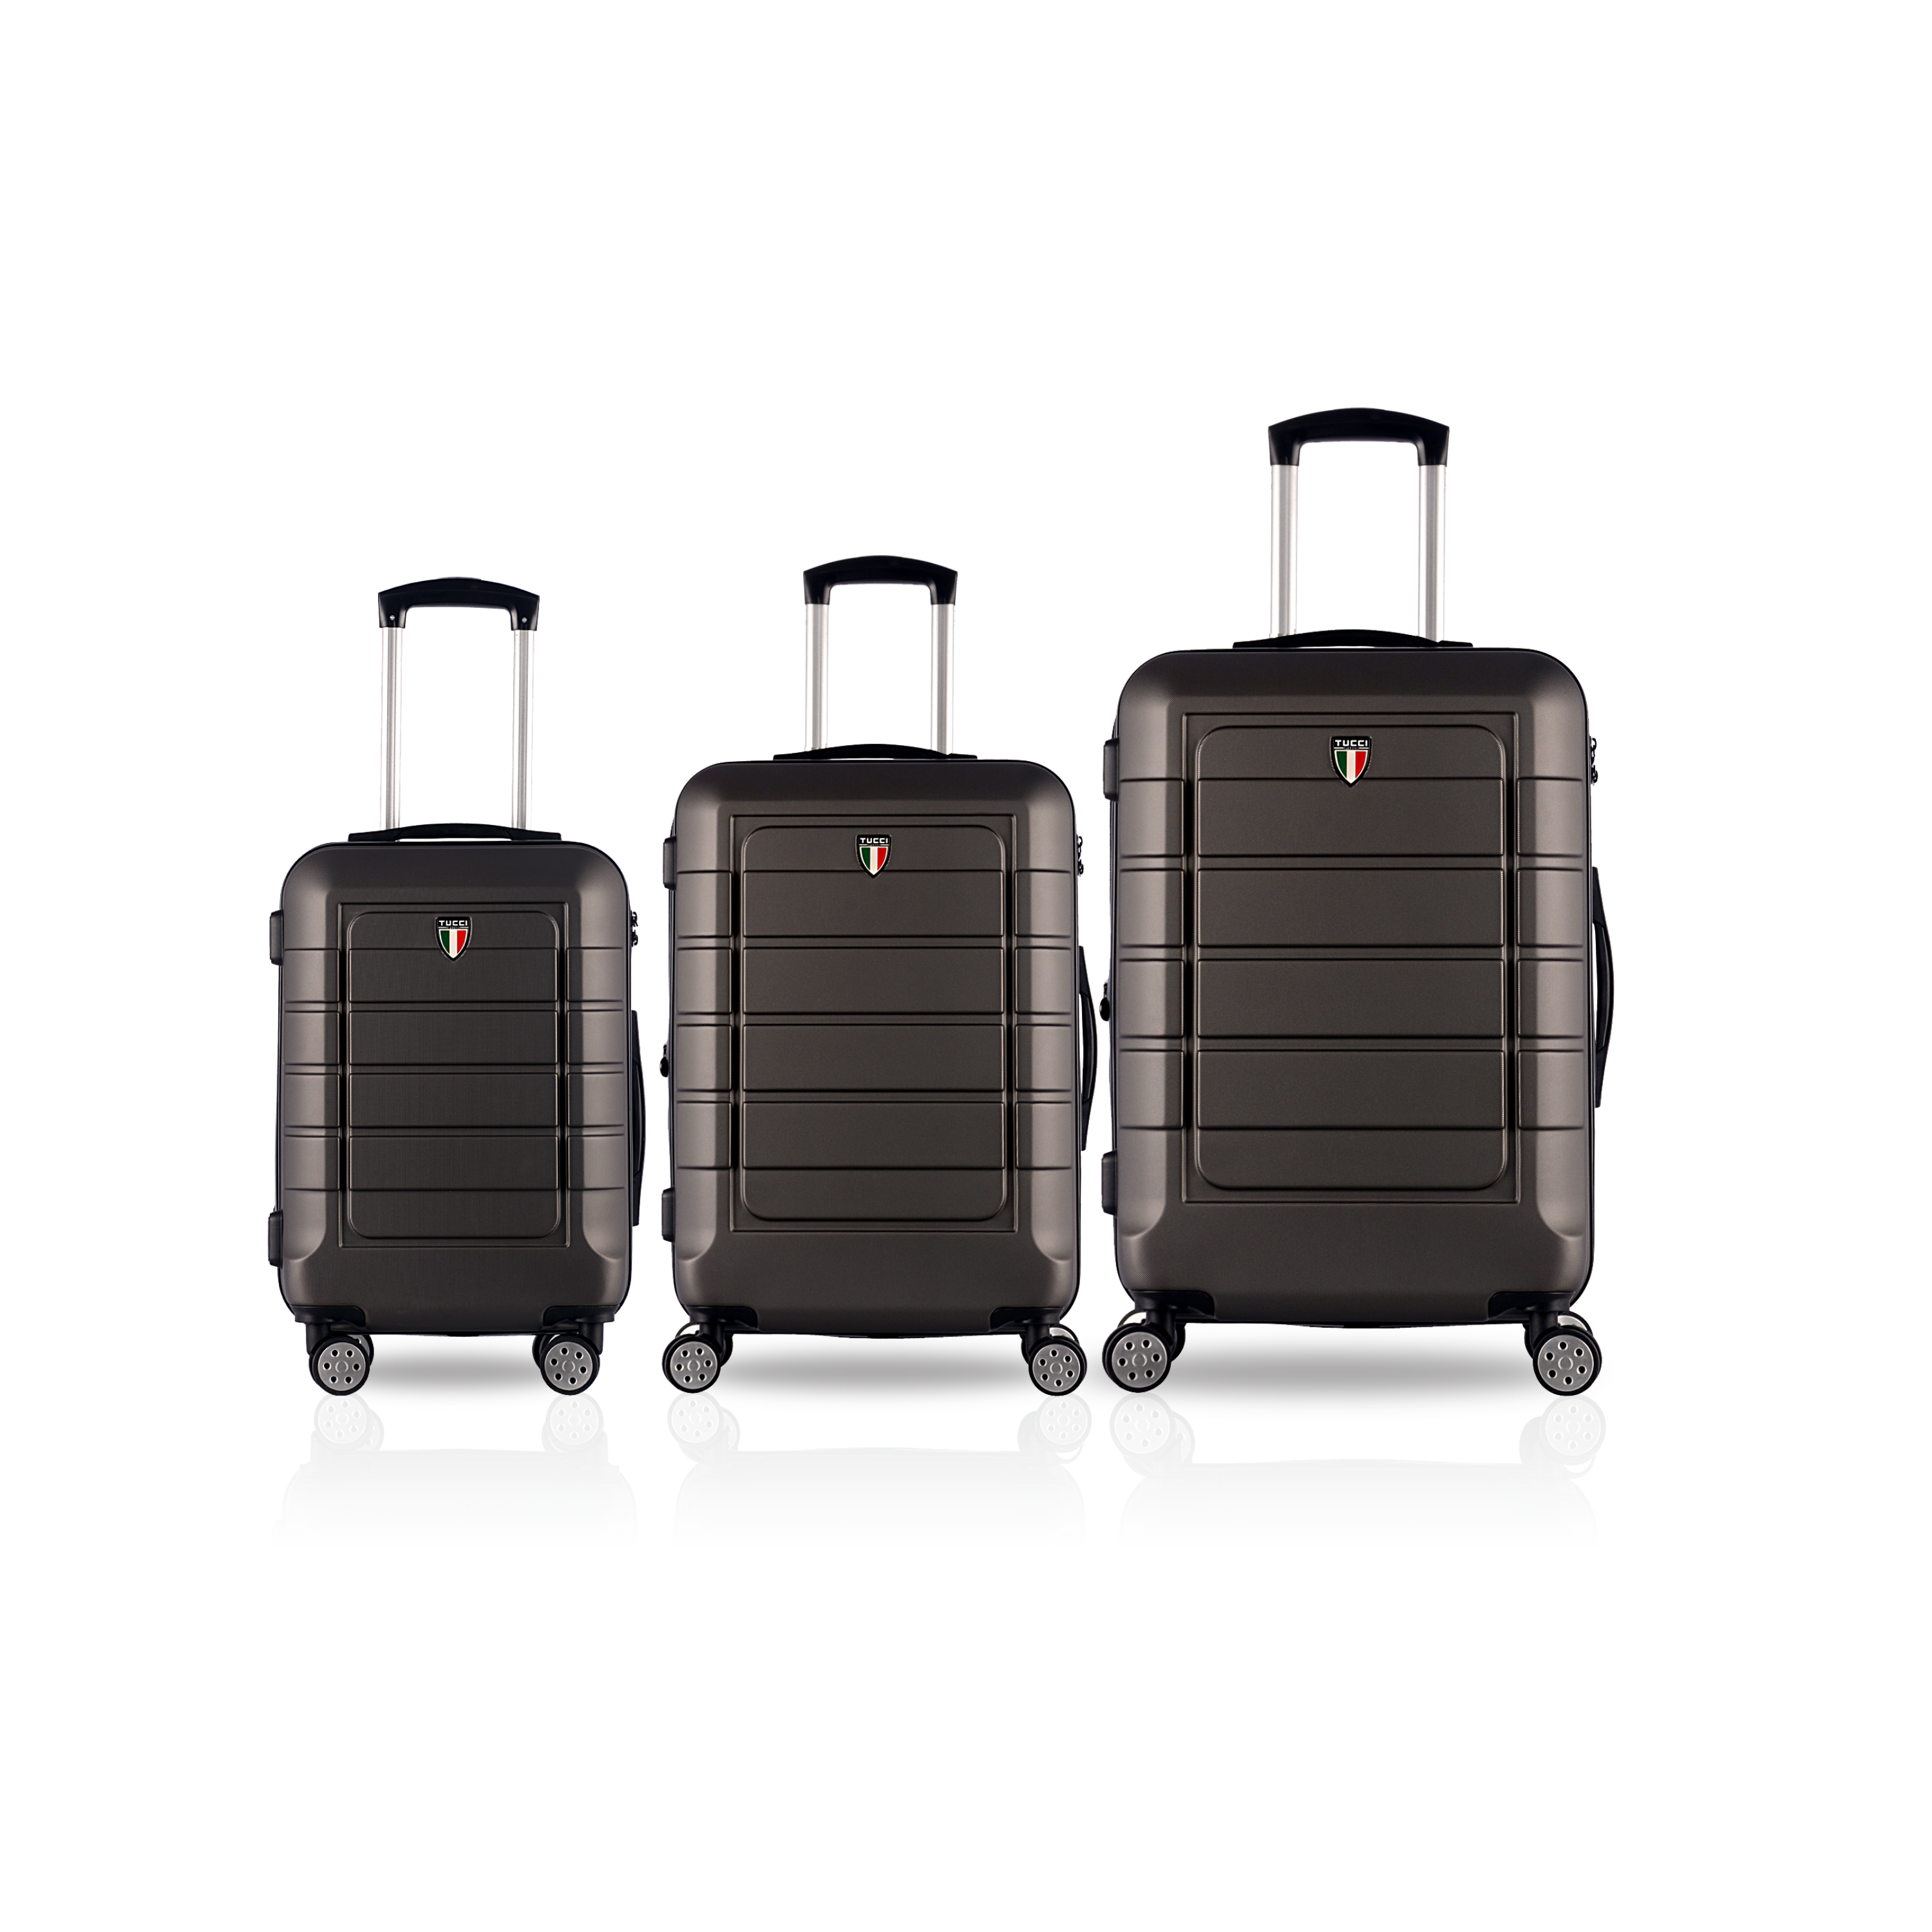 TUCCI CONSOLE ABS 3 PC (20", 24", 28") Luggage Set